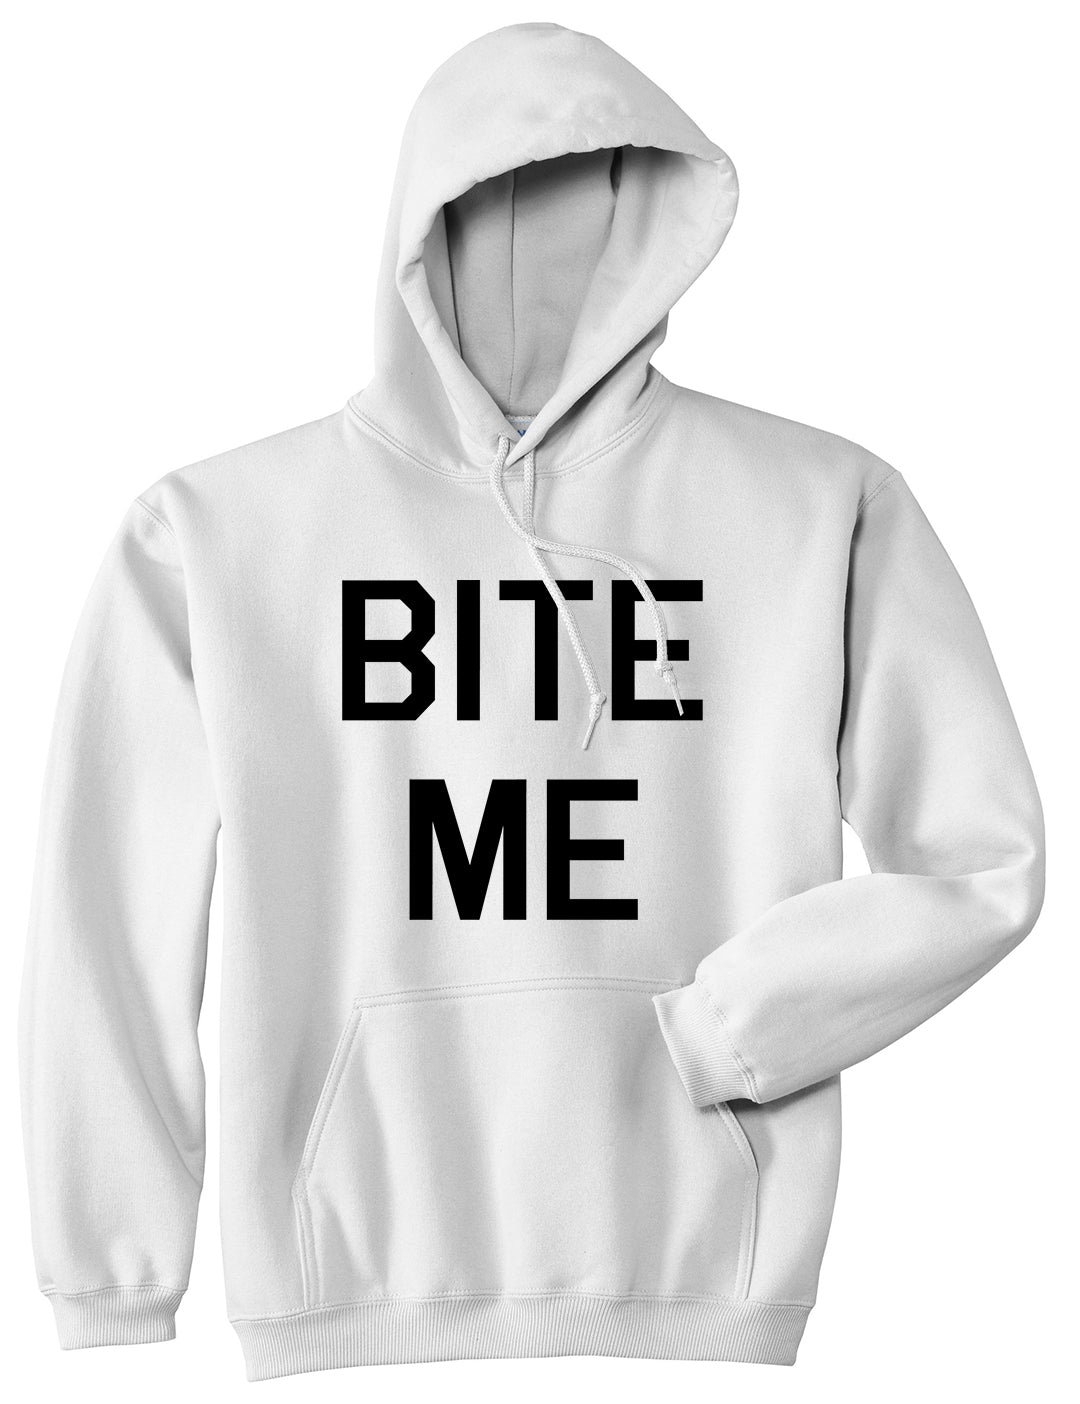 Bite Me White Pullover Hoodie by Kings Of NY